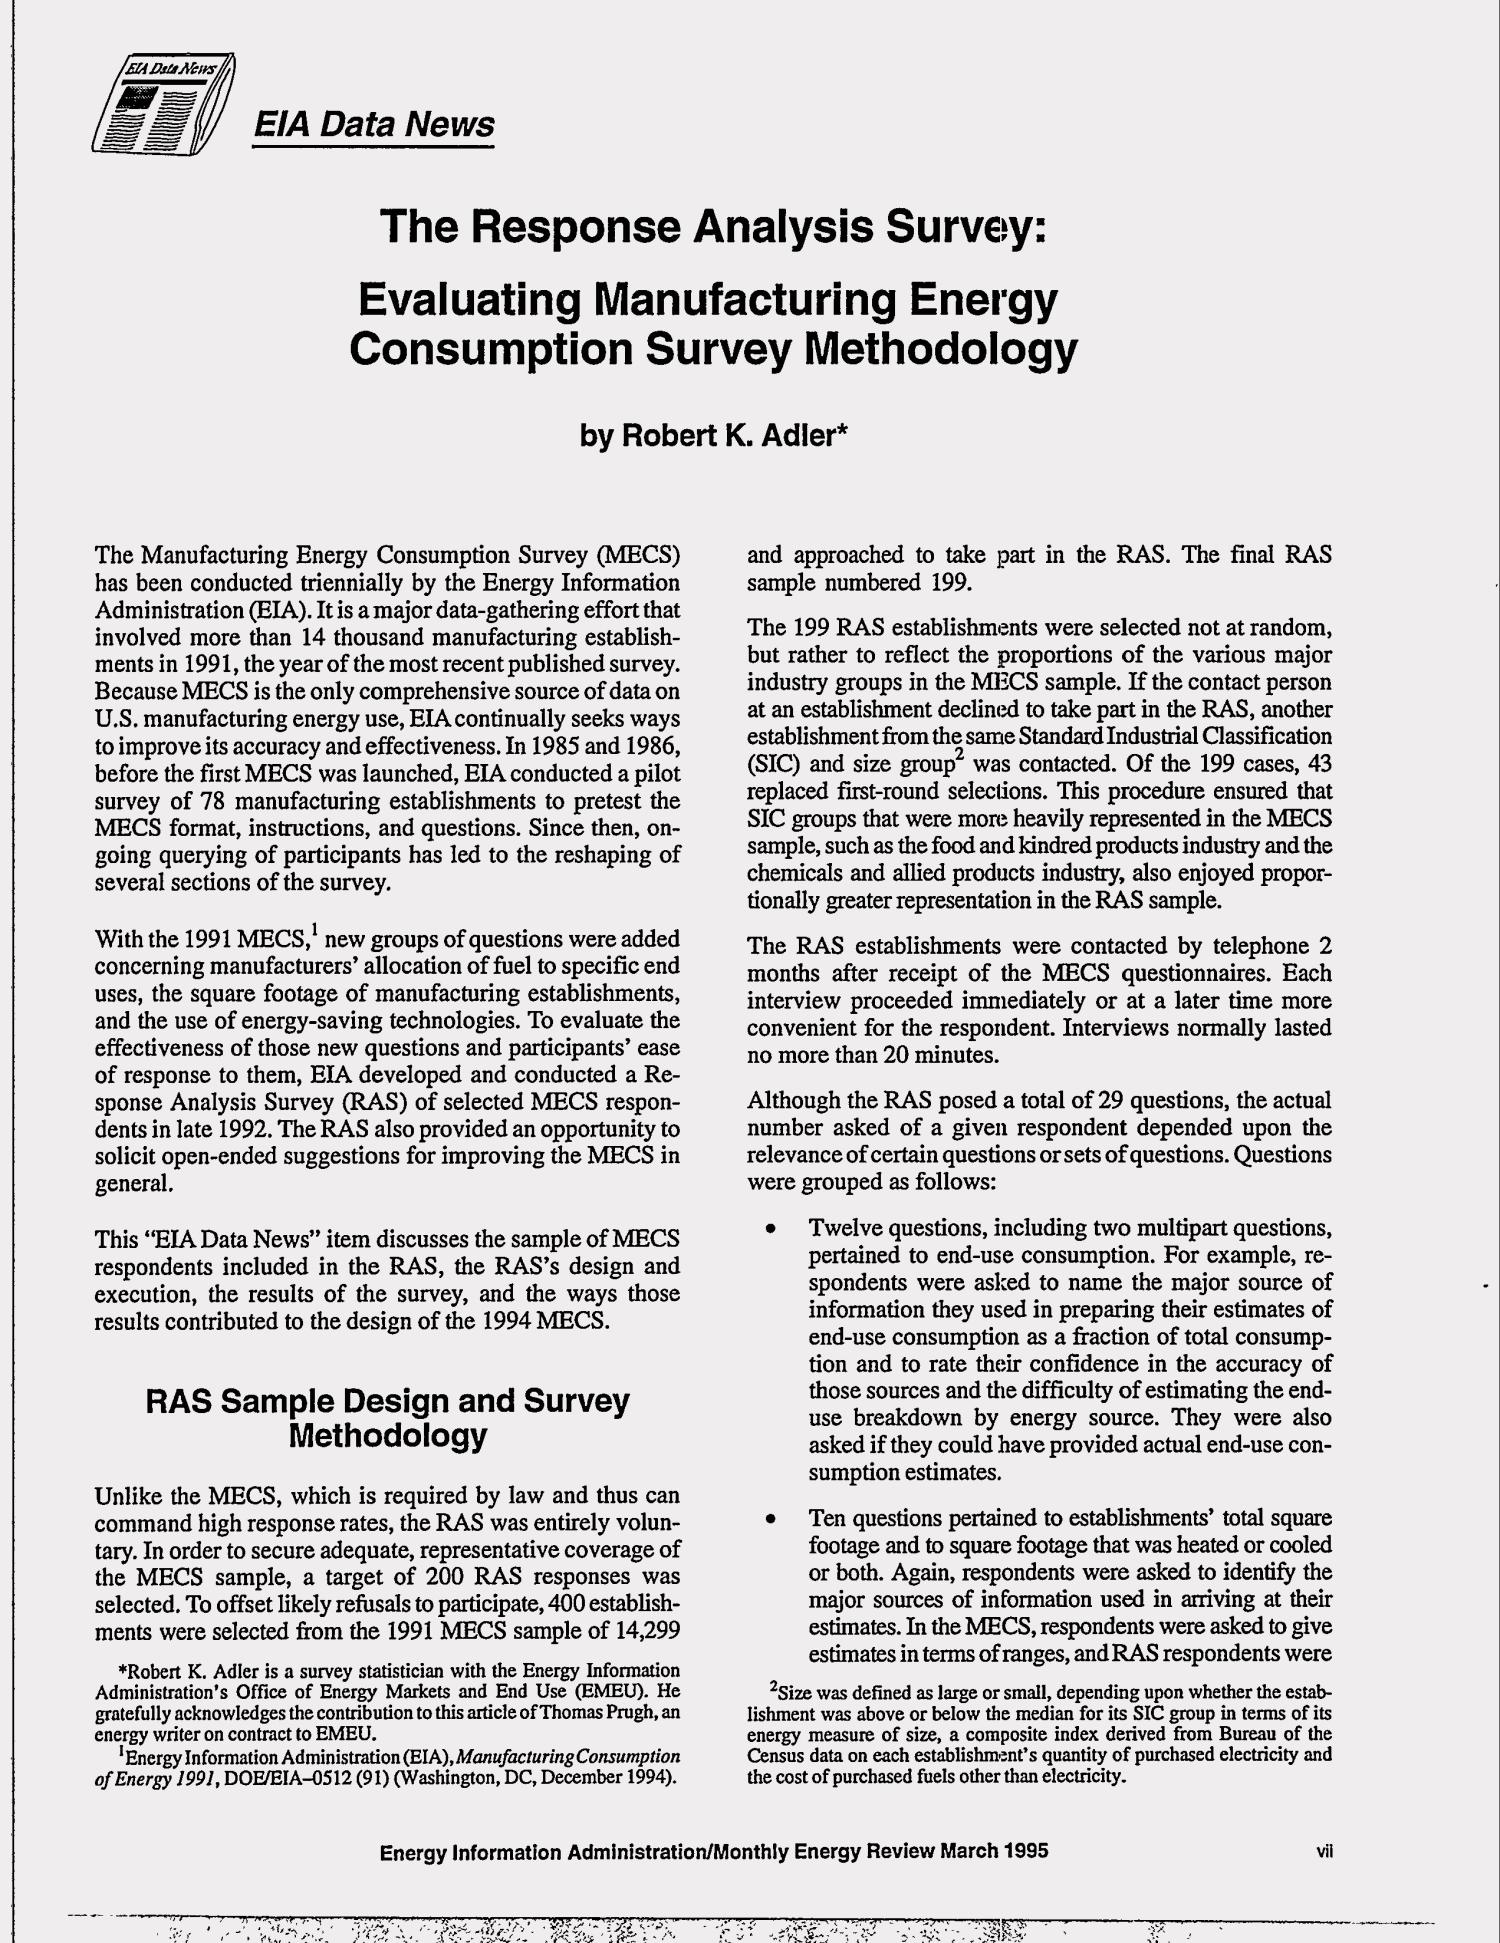 Monthly energy review, March 1995
                                                
                                                    [Sequence #]: 9 of 186
                                                